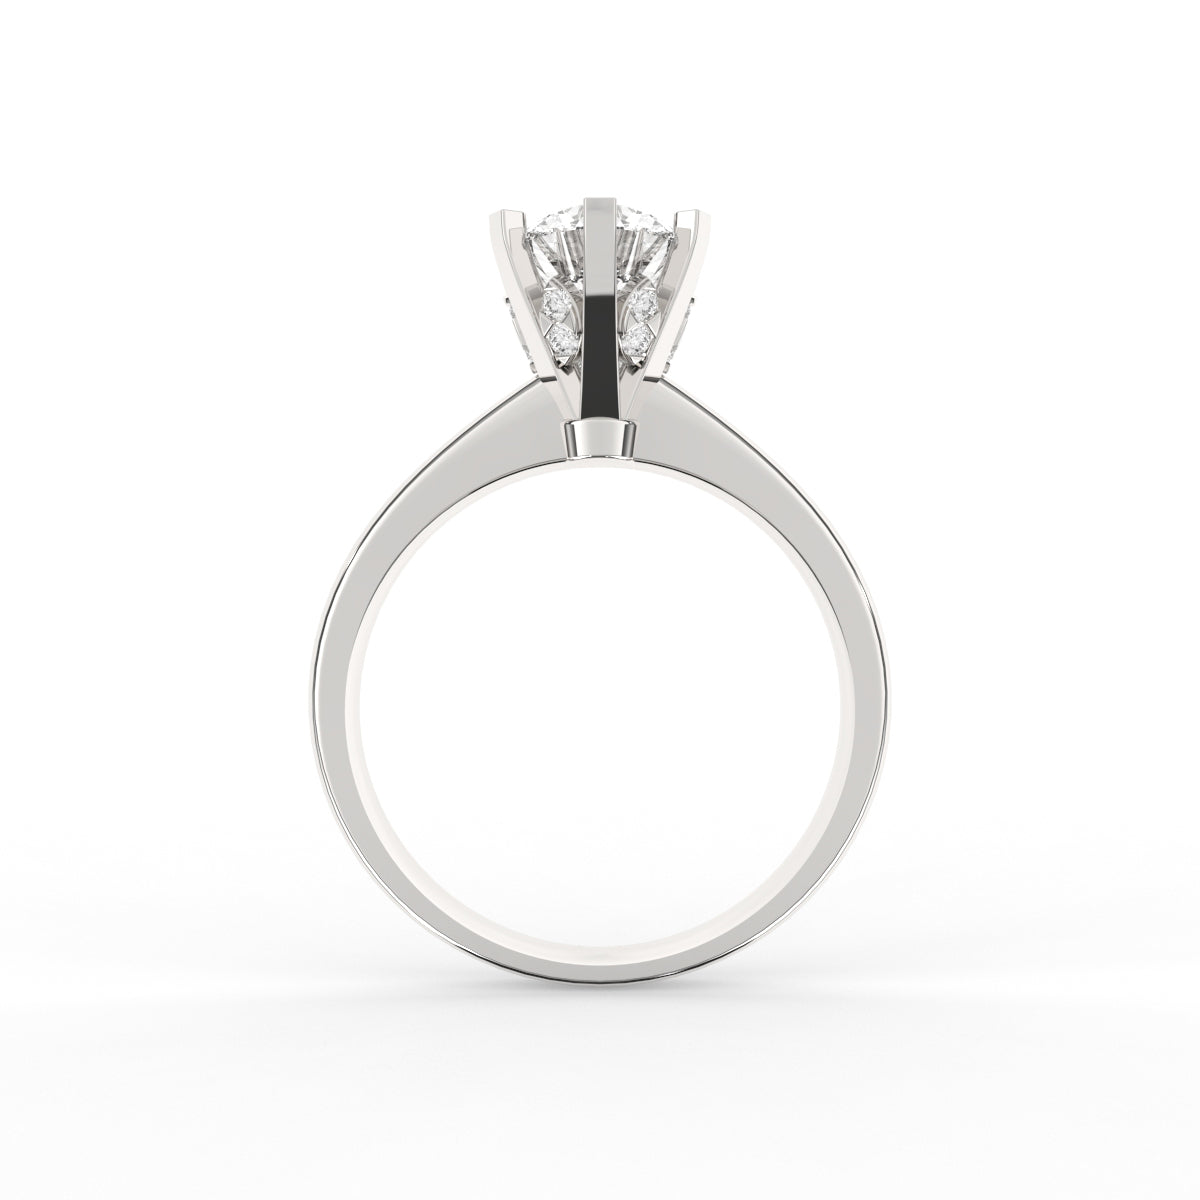 Six Prongs Solitaire Diamond Ring